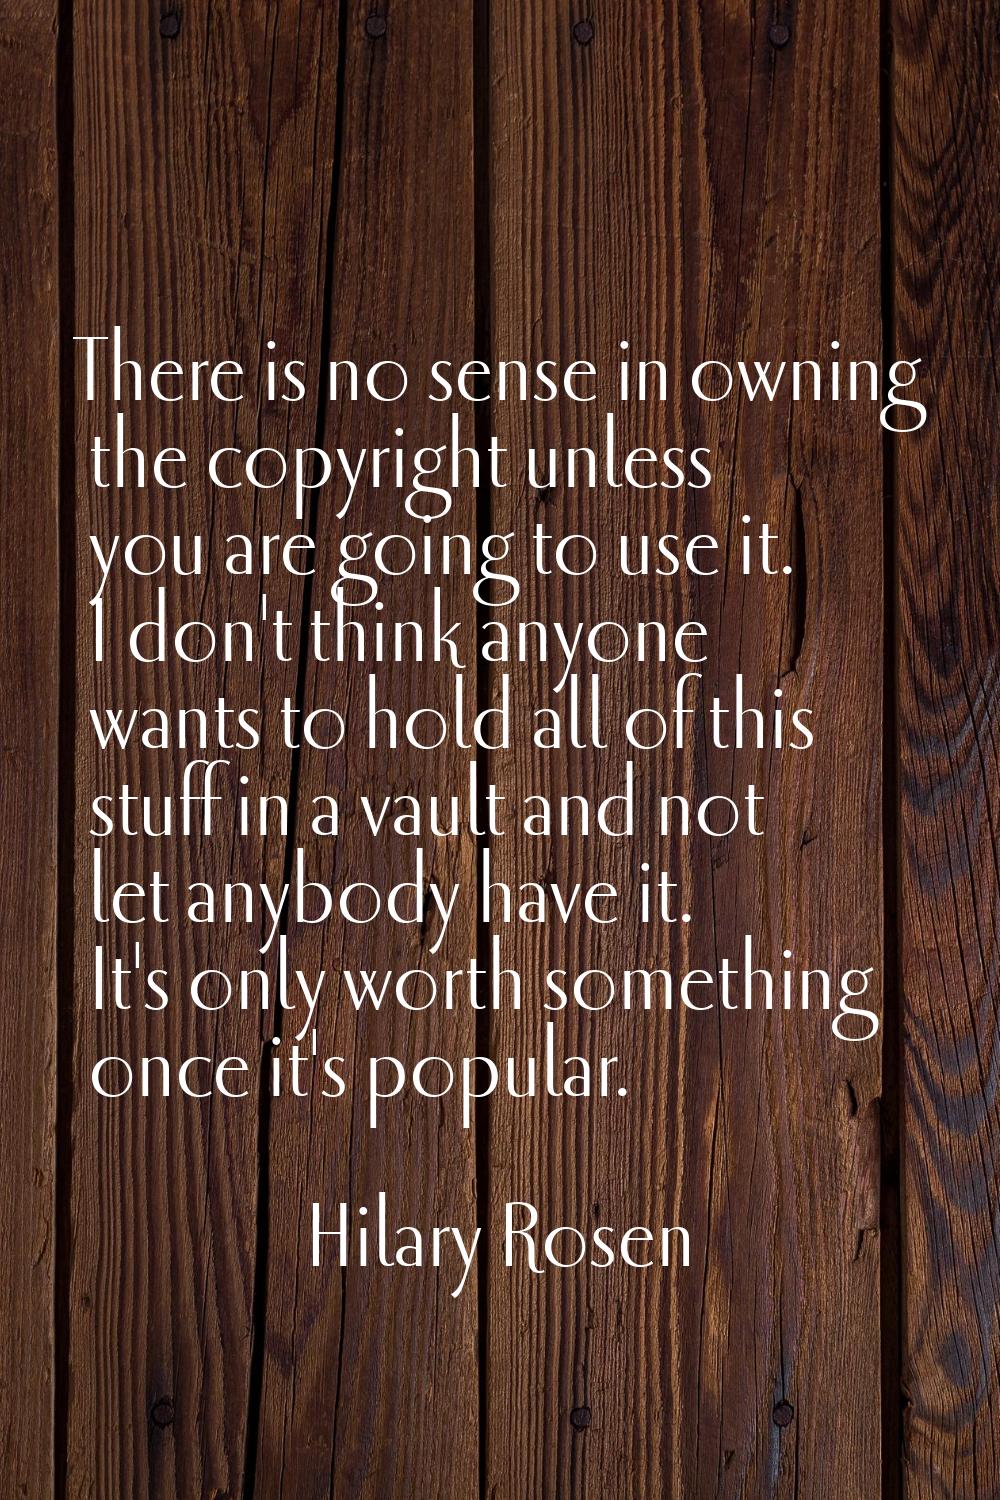 There is no sense in owning the copyright unless you are going to use it. I don't think anyone want